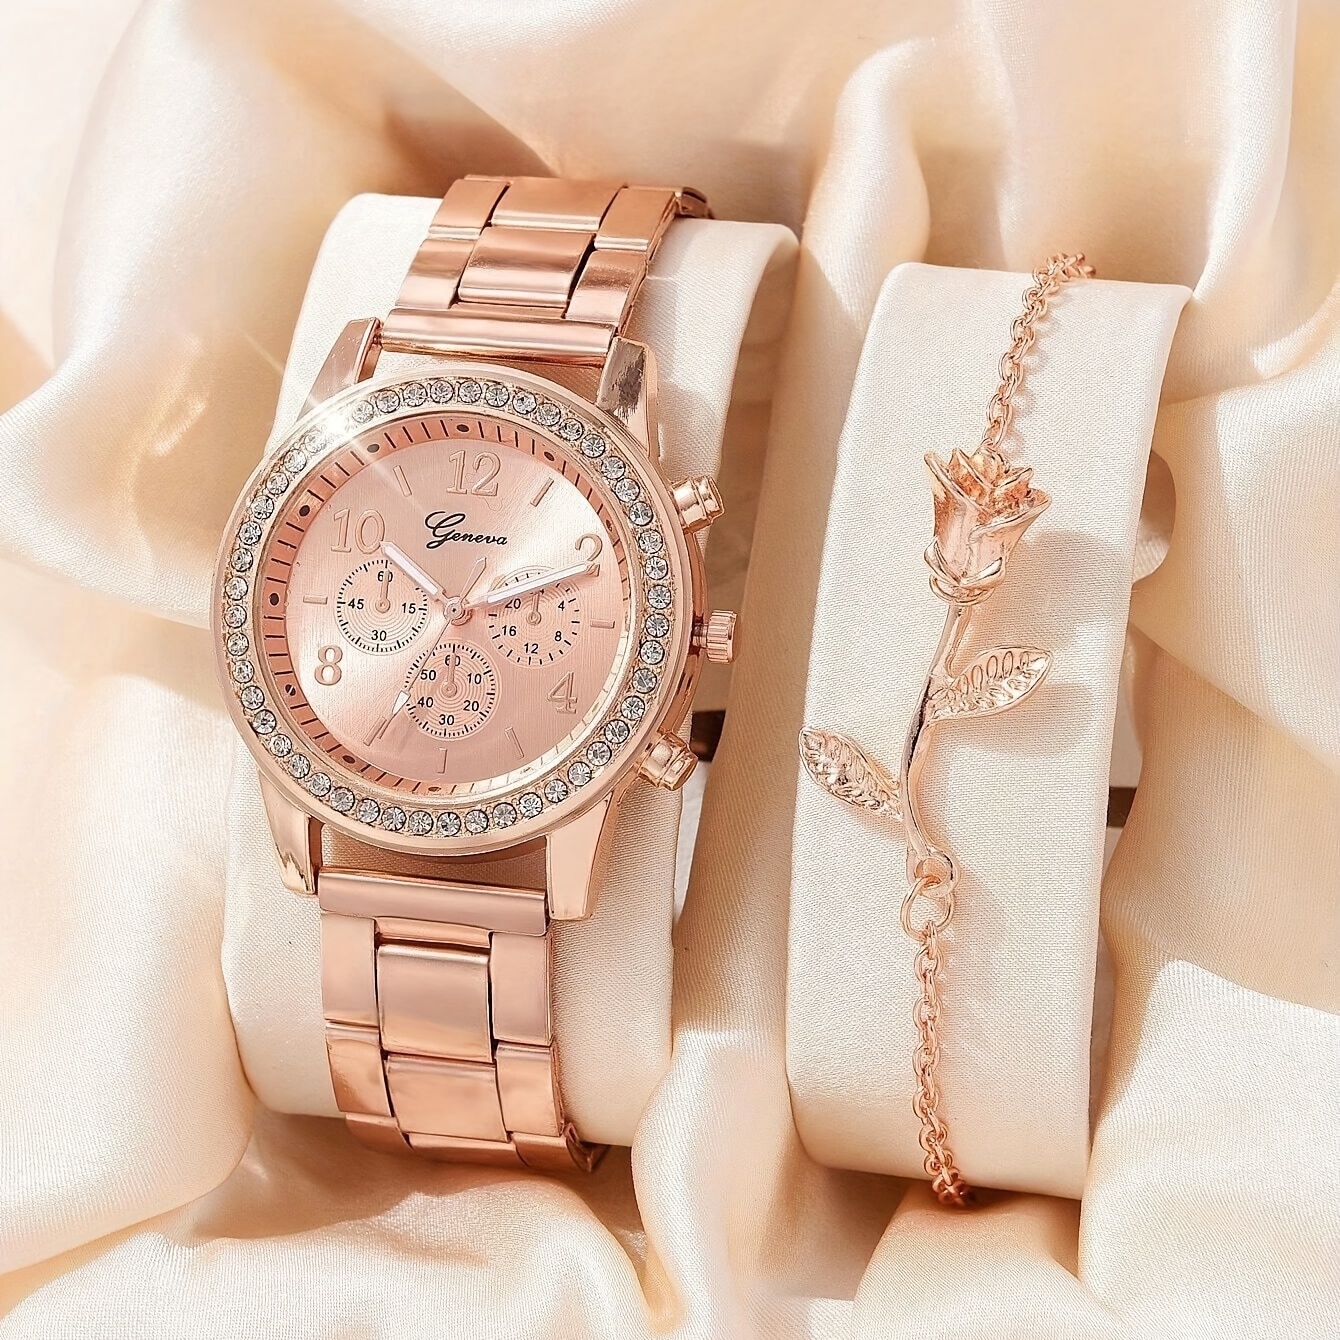 rose gold watches > Purchase - 57%